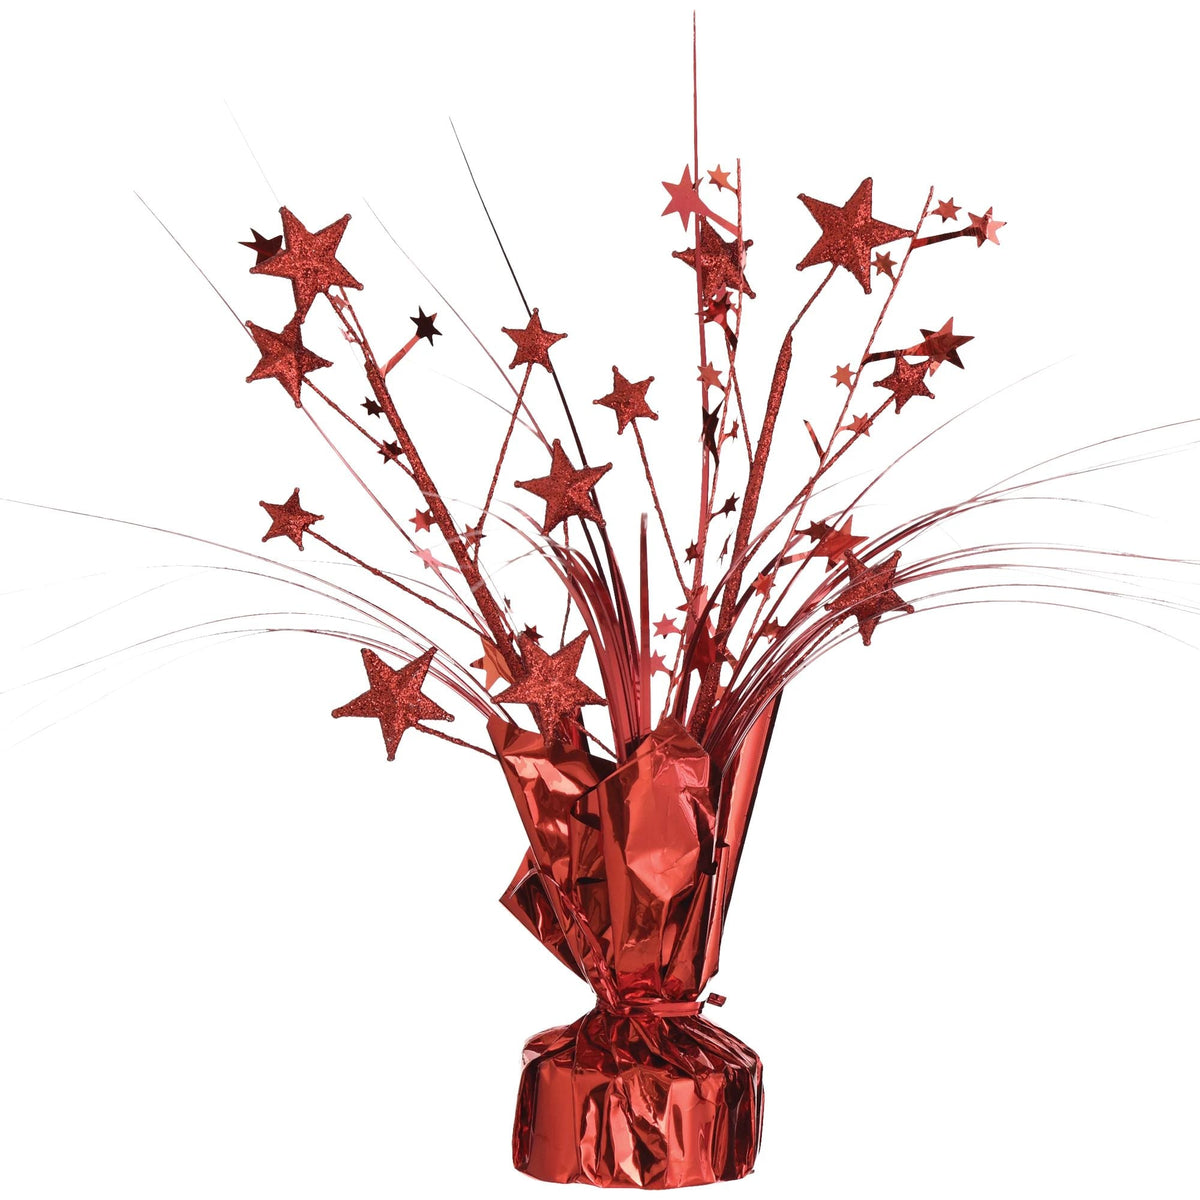 AMSCAN CA Decorations Spray Centerpiece with Stars, Red, 12 Inches, 1 Count